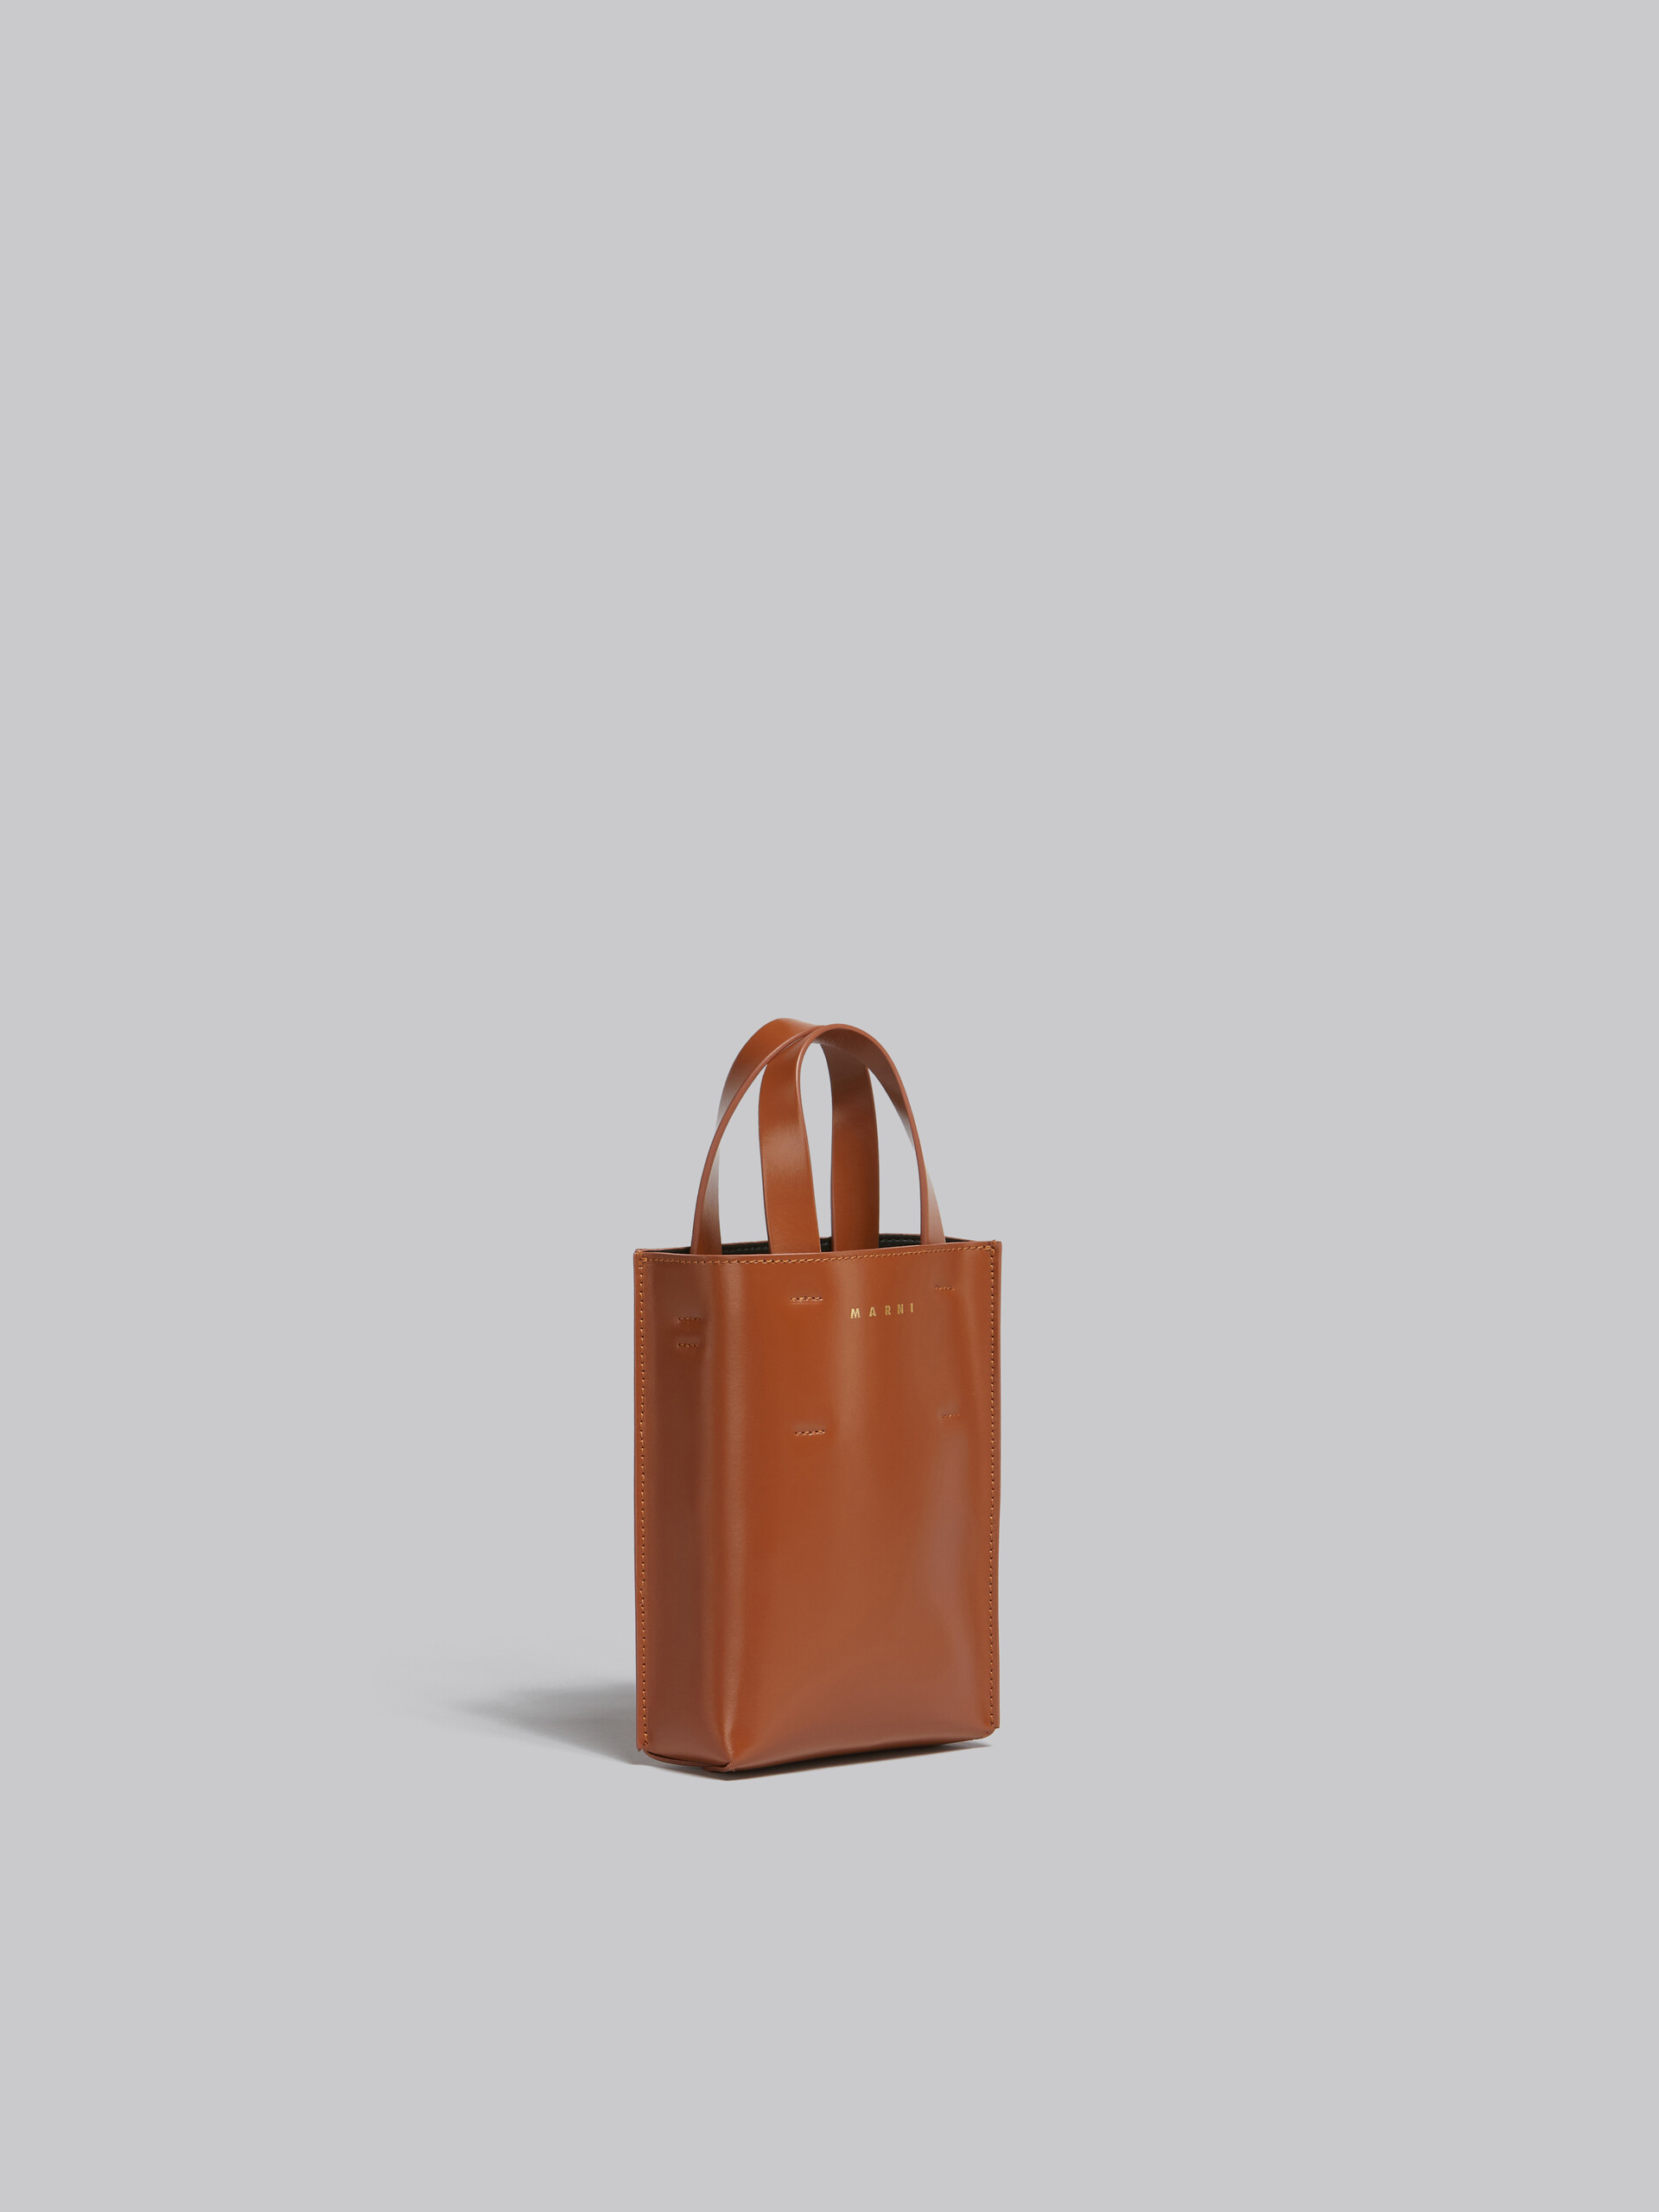 MUSEO nano bag in light blue leather - Shopping Bags - Image 6